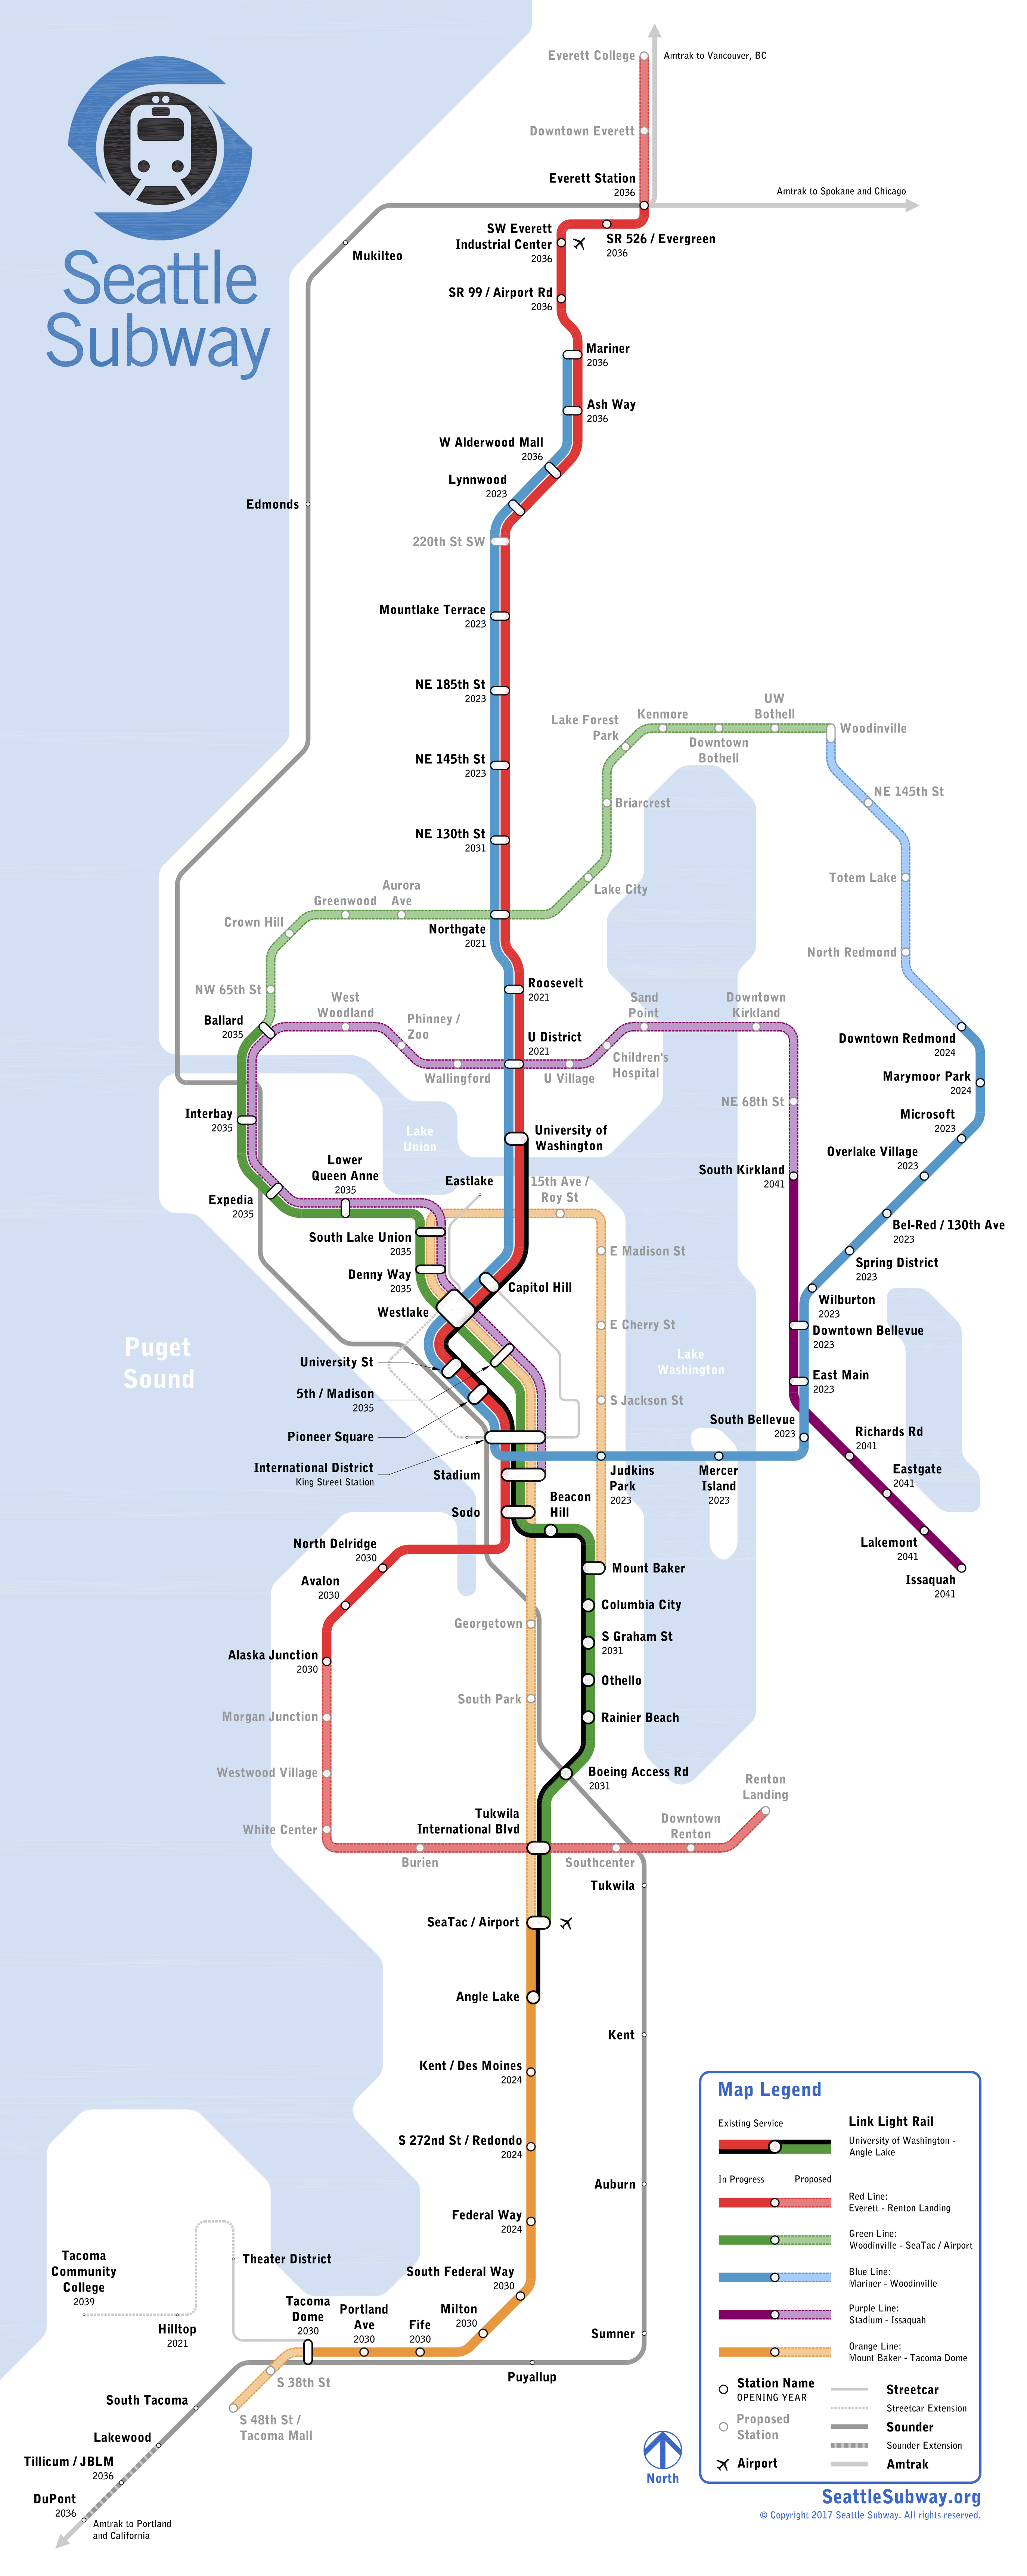 The new Seattle Subway 2017 regional vision map. (Seattle Subway)